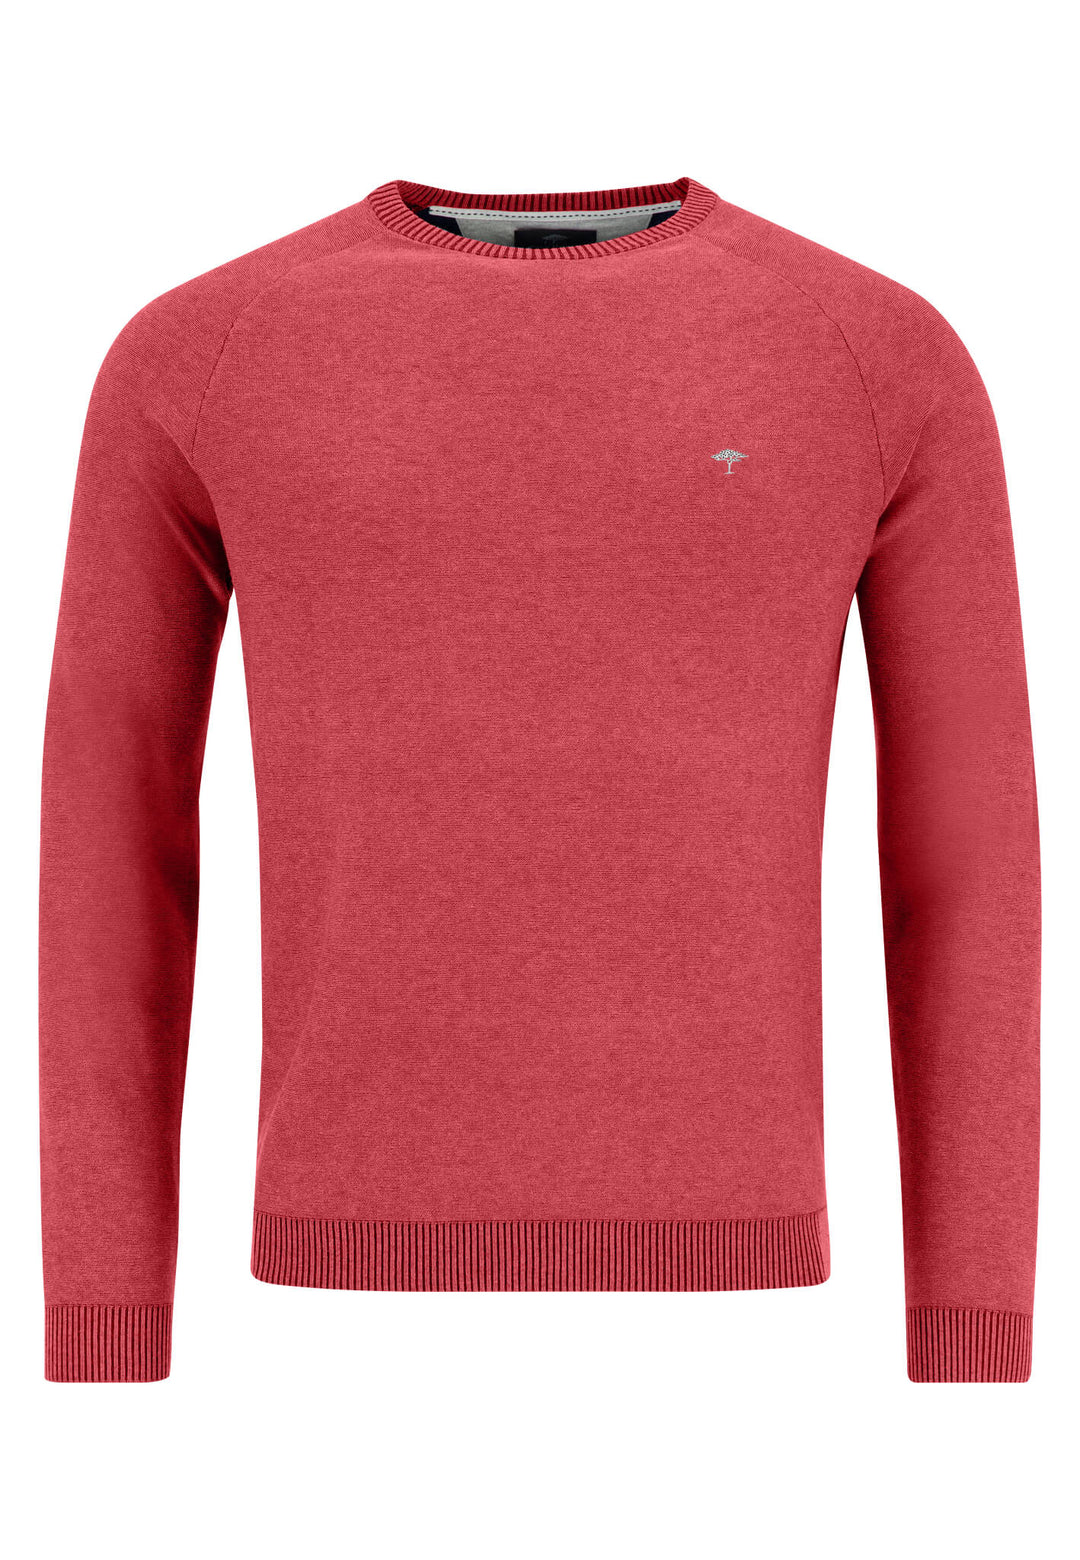 FYNCH-HATTON | sweater – of Outlet made fine cotton FYNCH-HATTON